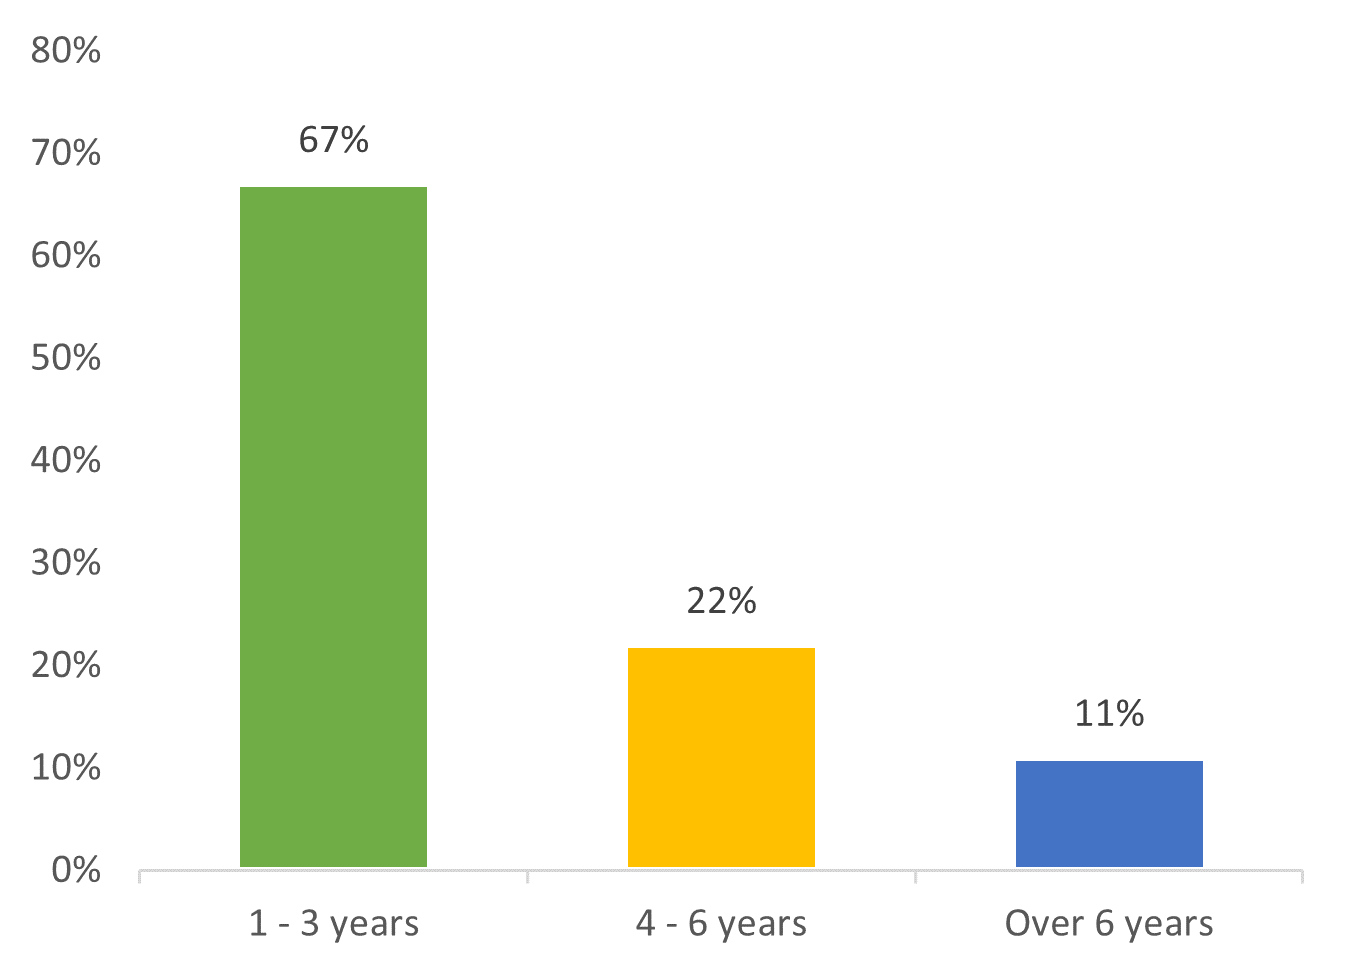 Bar chart showing that 67% of producers surveyed had been selling to schools for 1-3 years, 22% 4-6 year, and 11% over 6 years